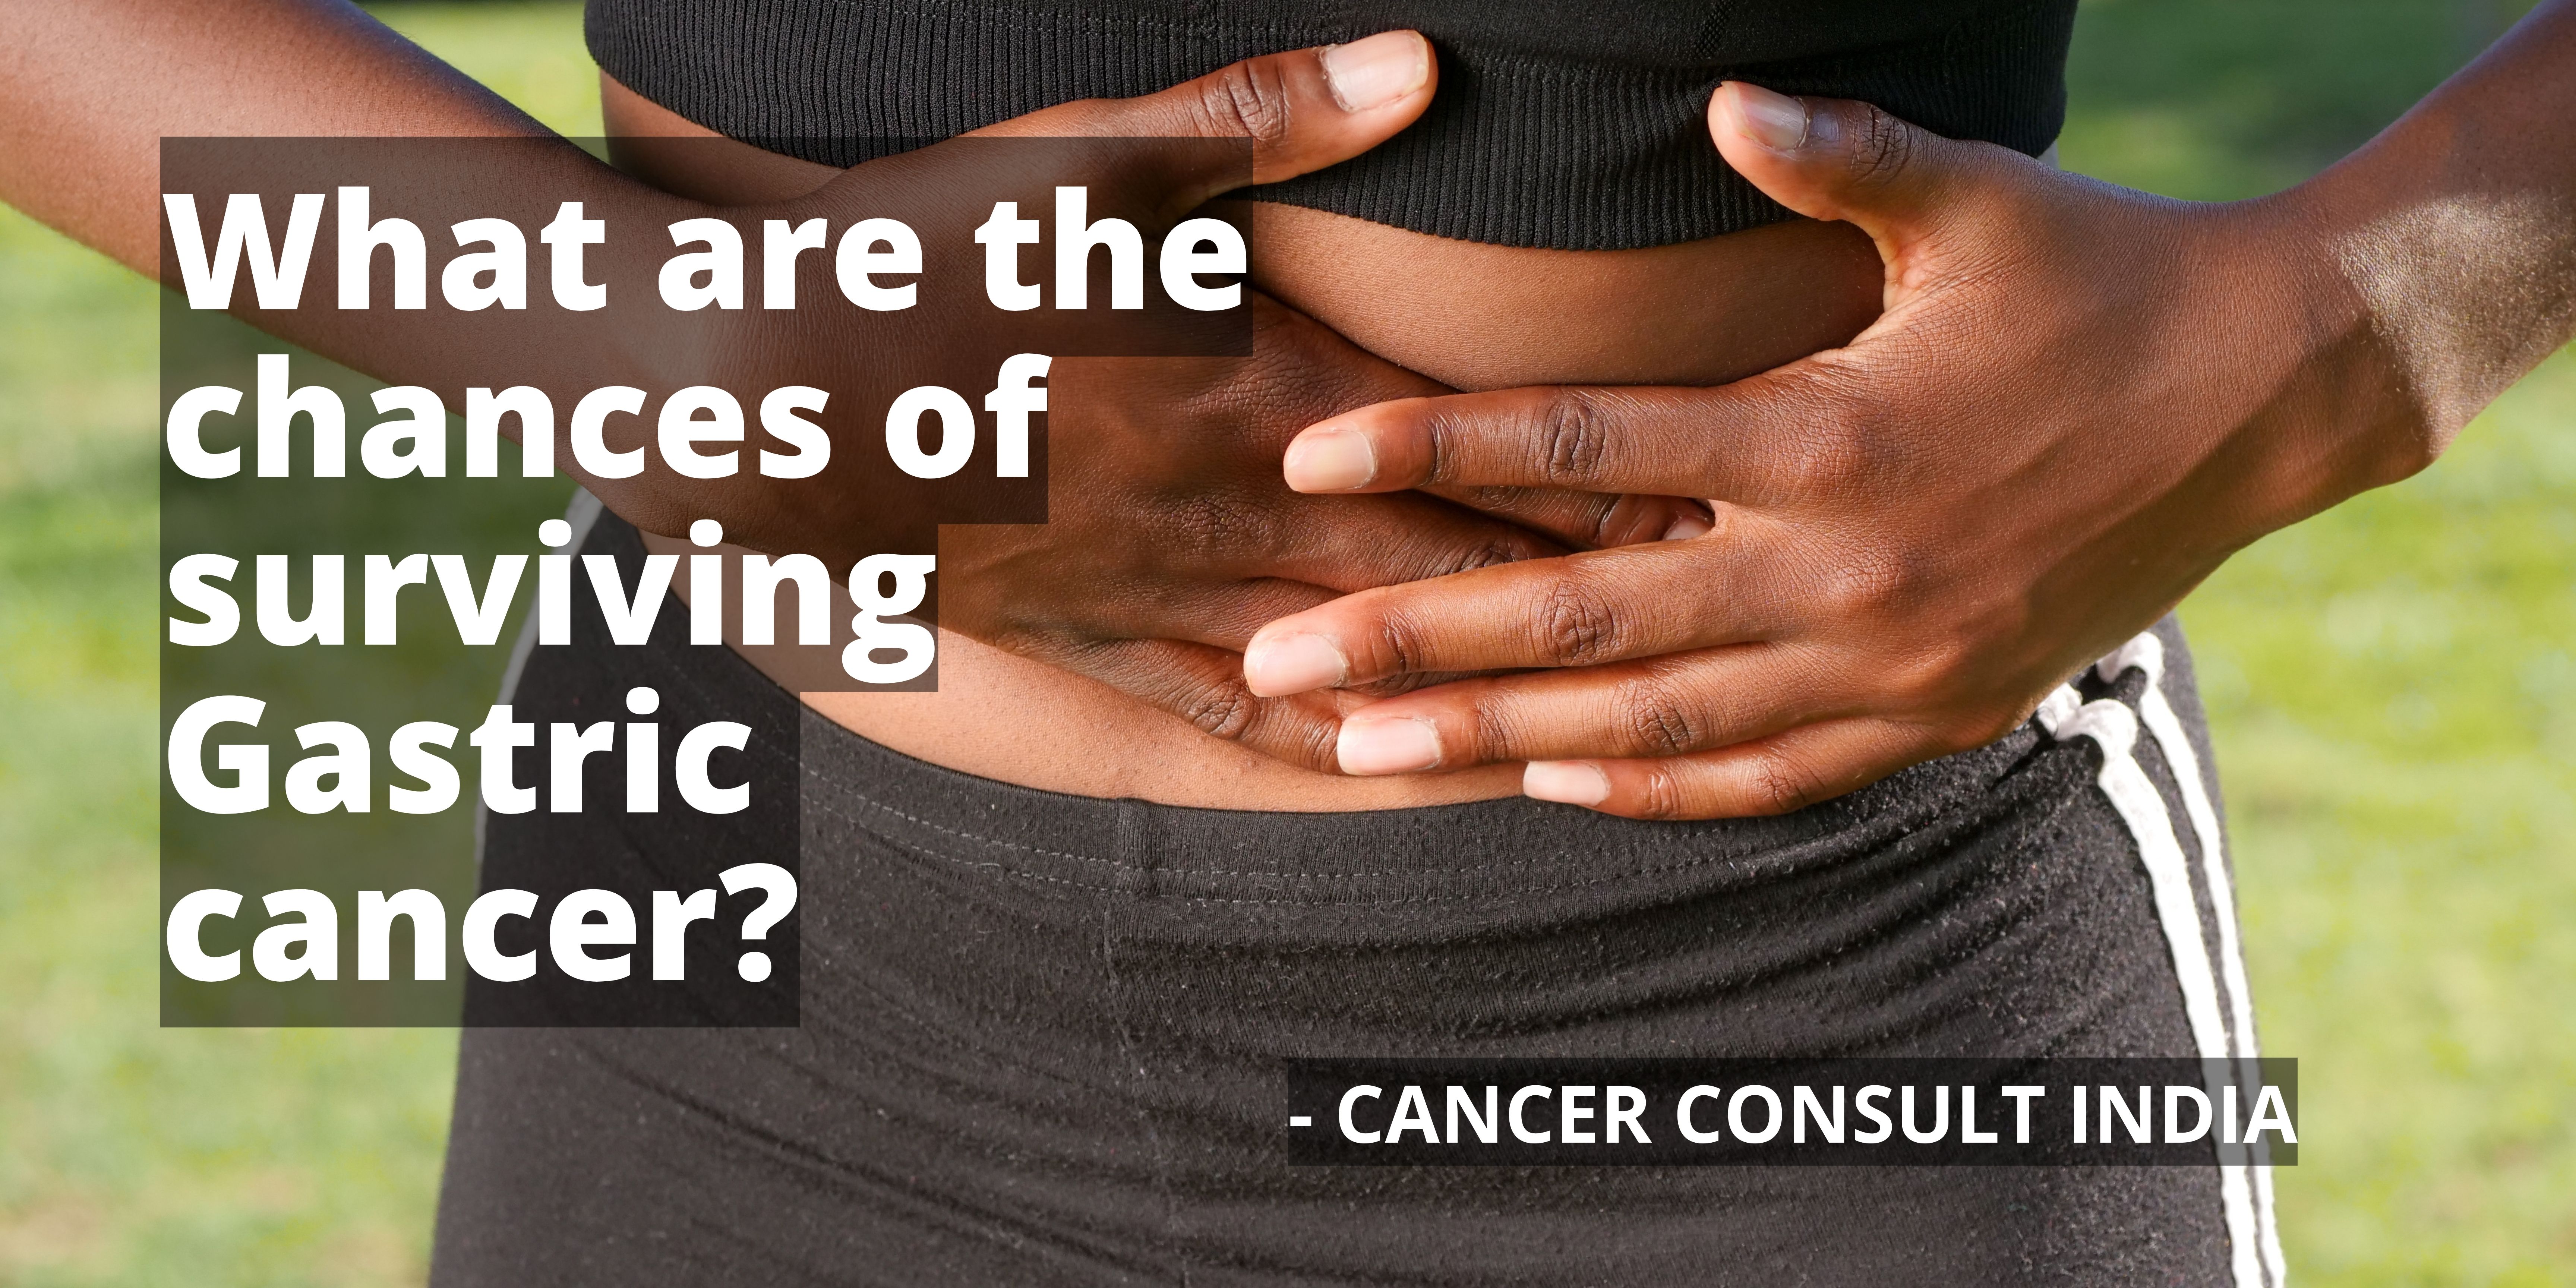 What are the chances of surviving Gastric cancer?